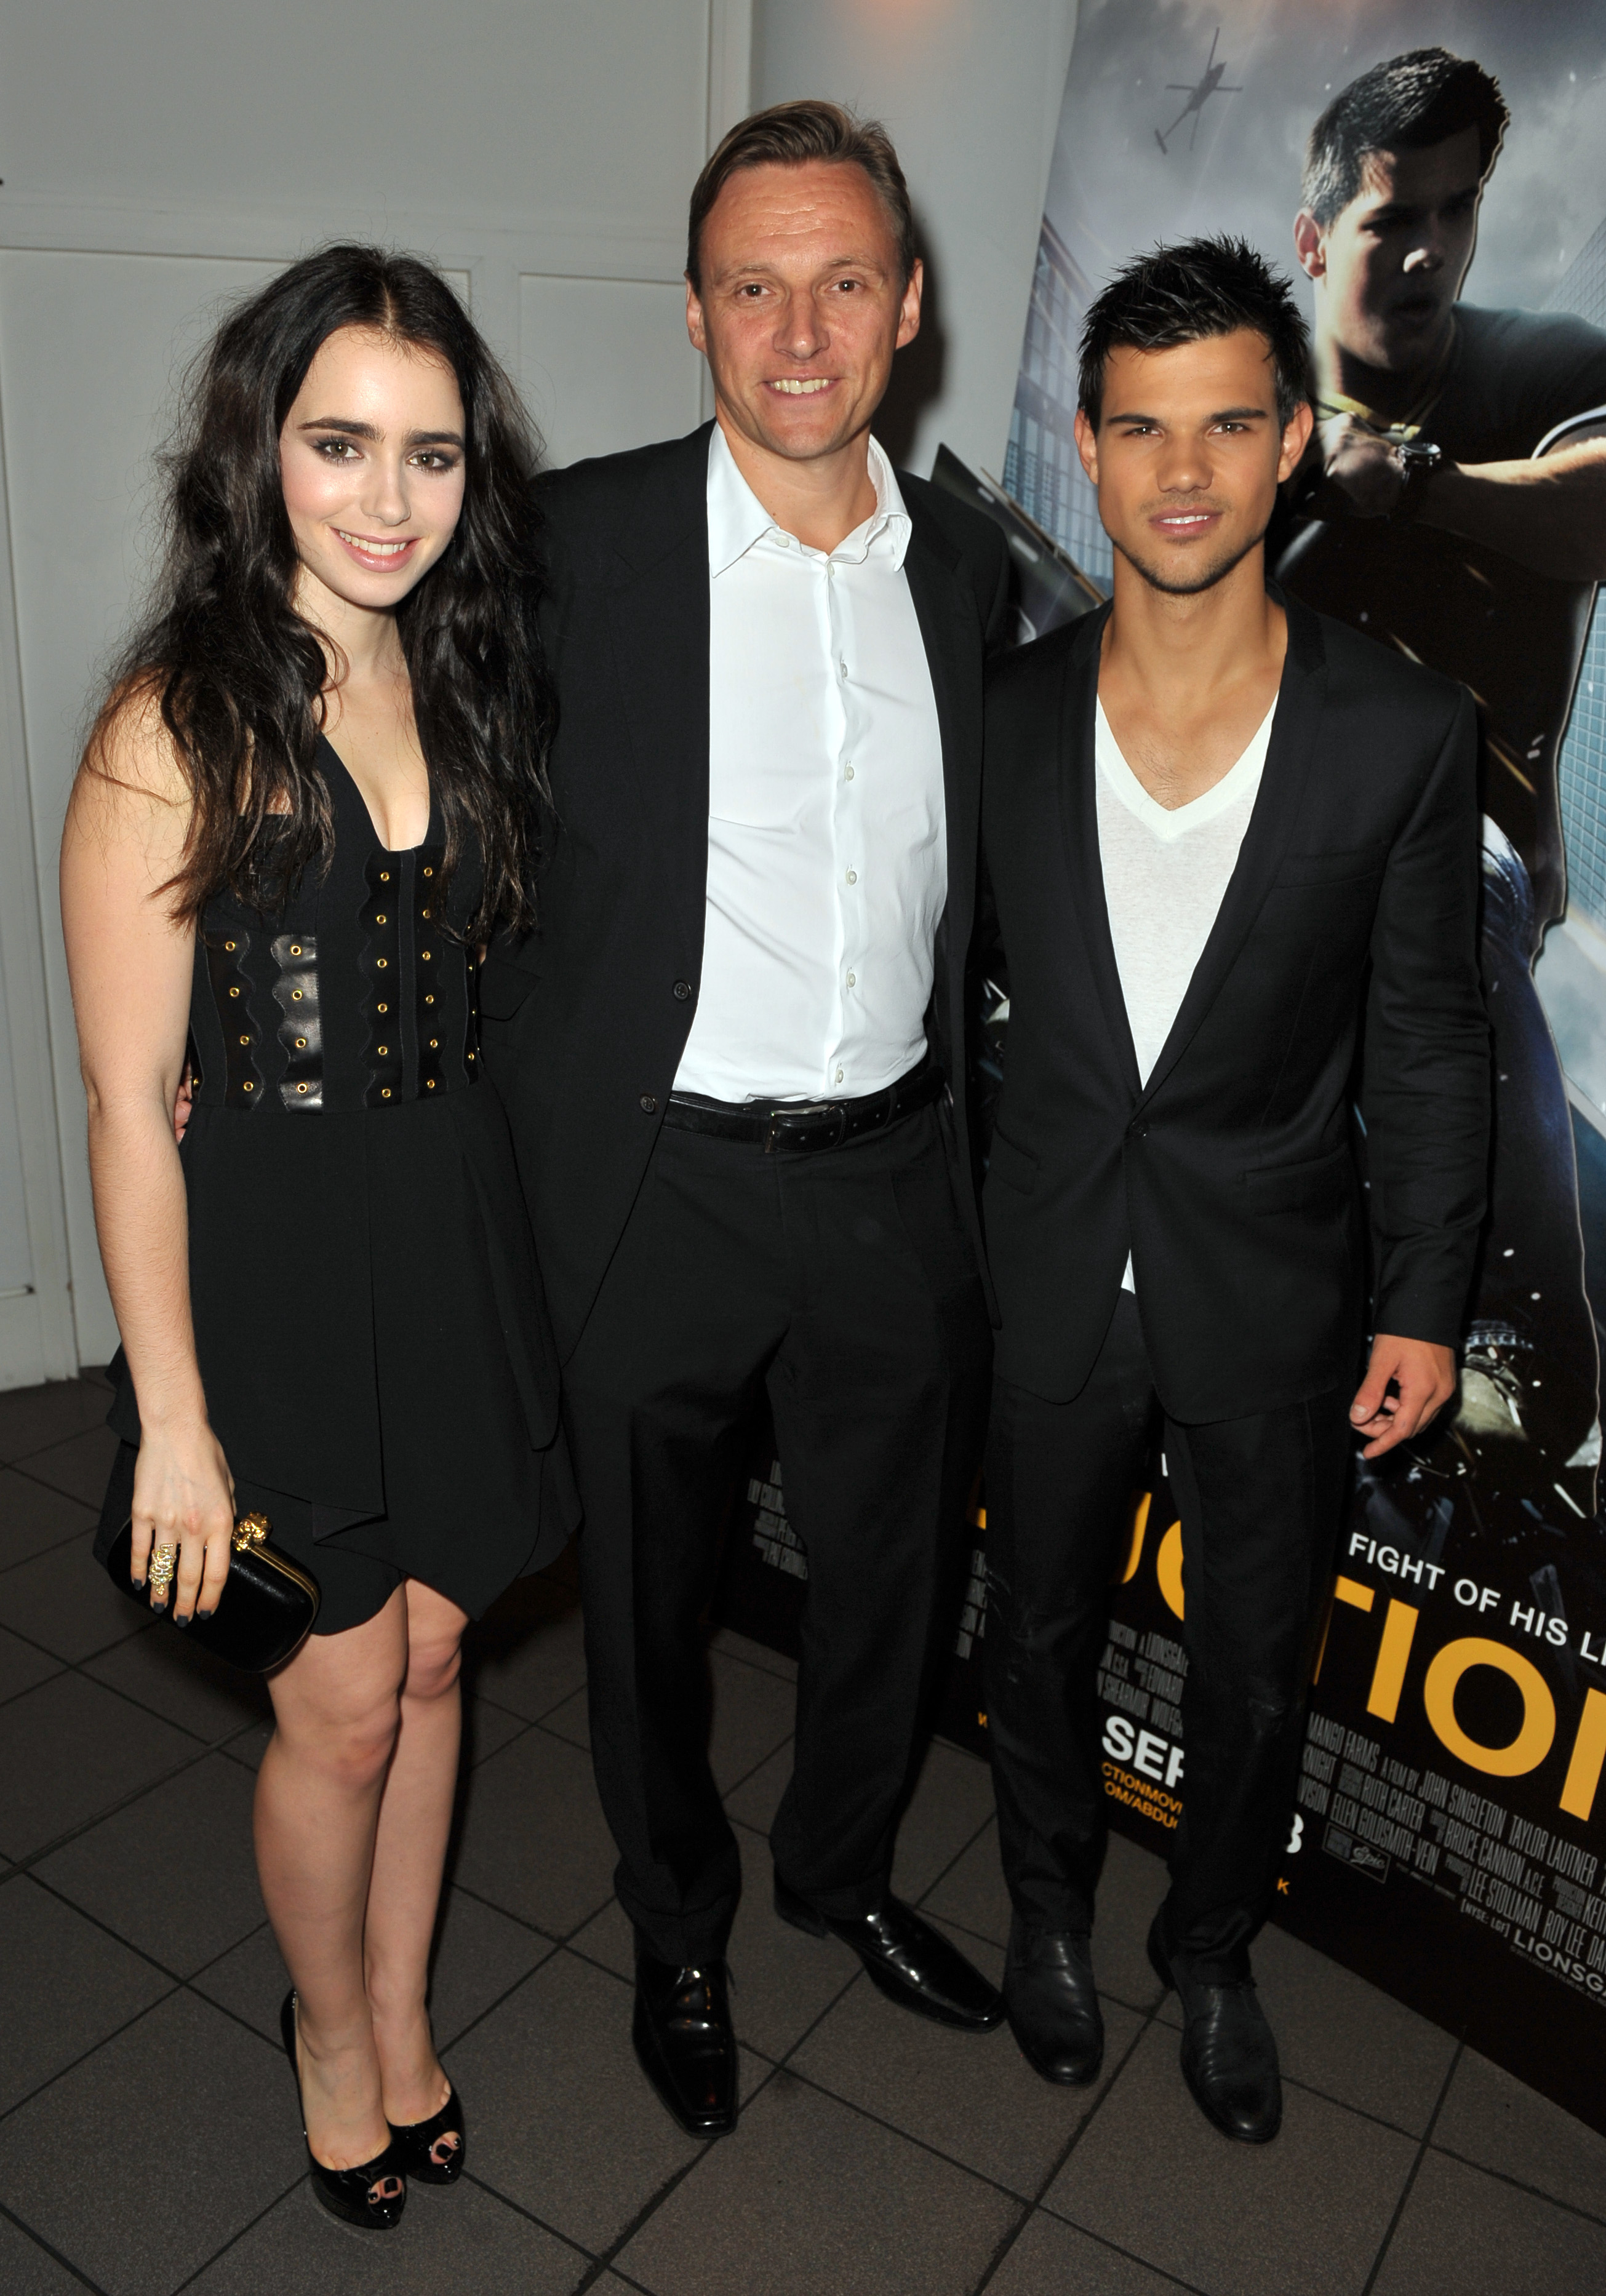 Lily Cole, Zygi Kamasa and Taylor Lautner at the UK Premiere of Abduction.